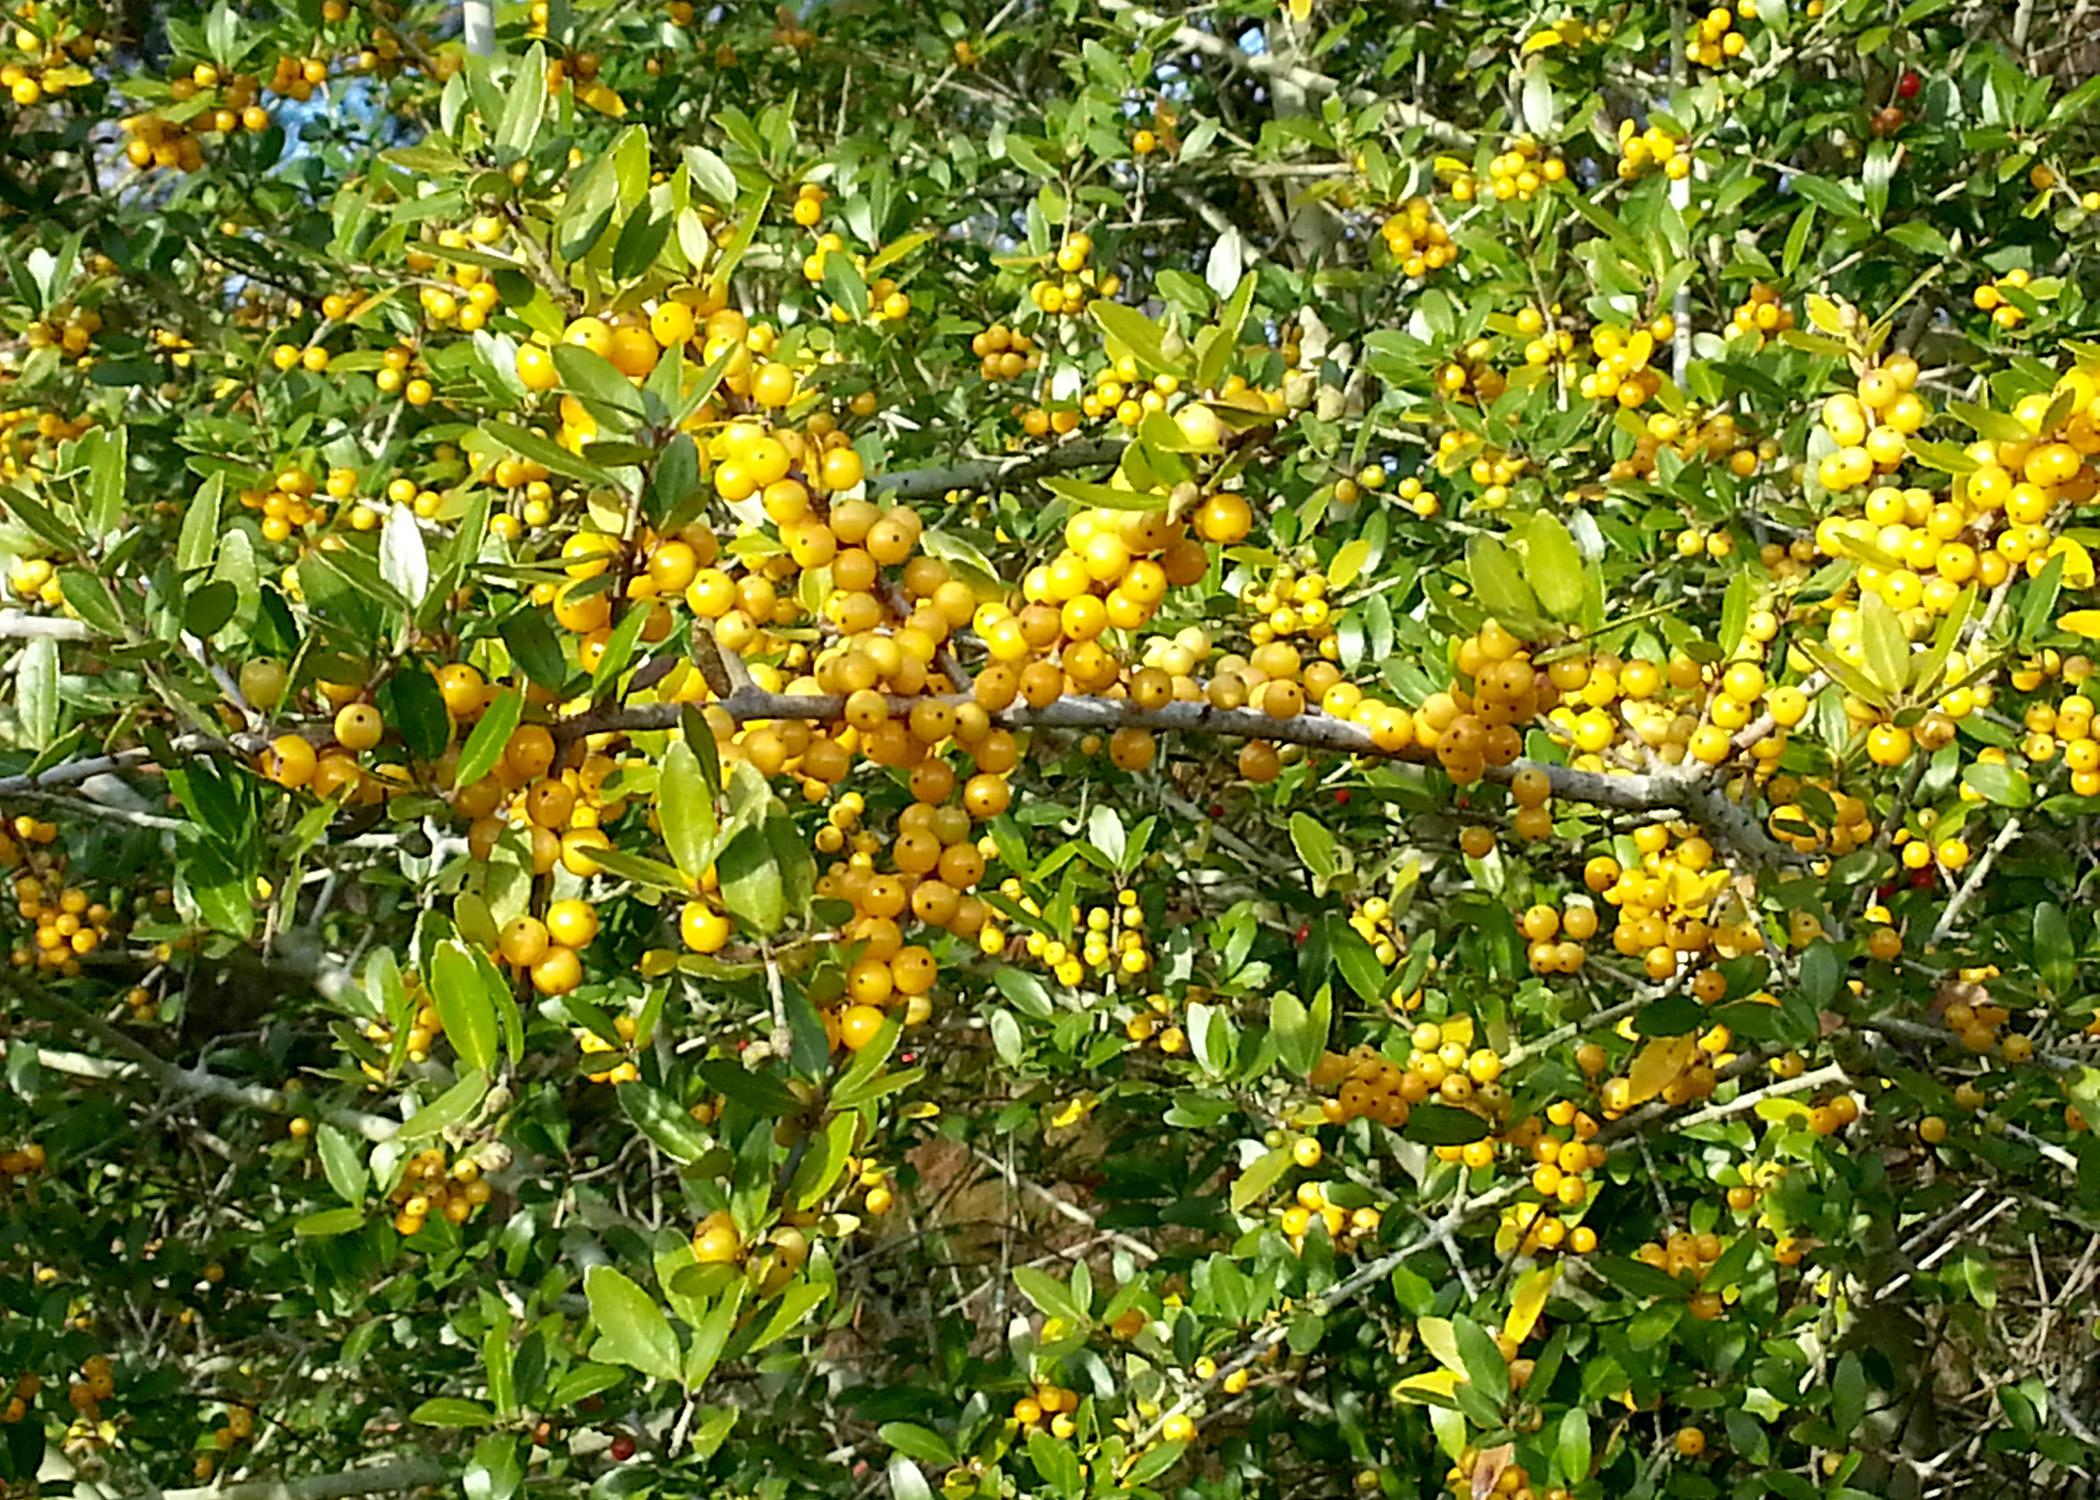 Although most Yaupon holly berries are red, a few commercially available selections have a mutation that produces yellow berries. (Photo by MSU Extension Service/Gary Bachman)